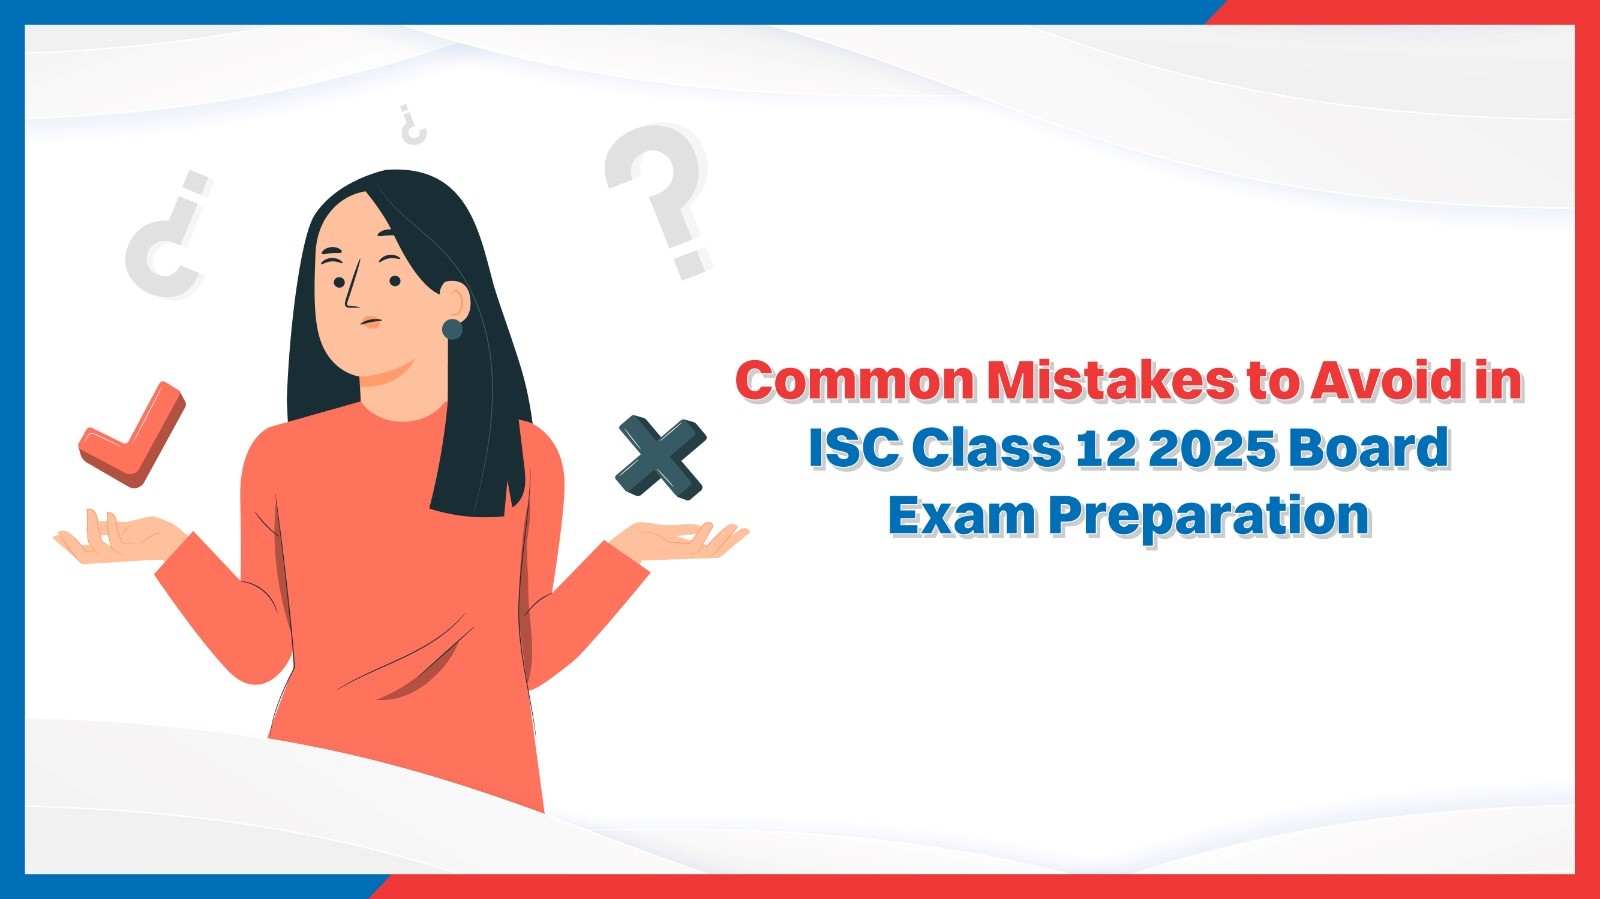 Common Mistakes to Avoid in ISC Class 12 2025 Board Exam Preparation.jpg